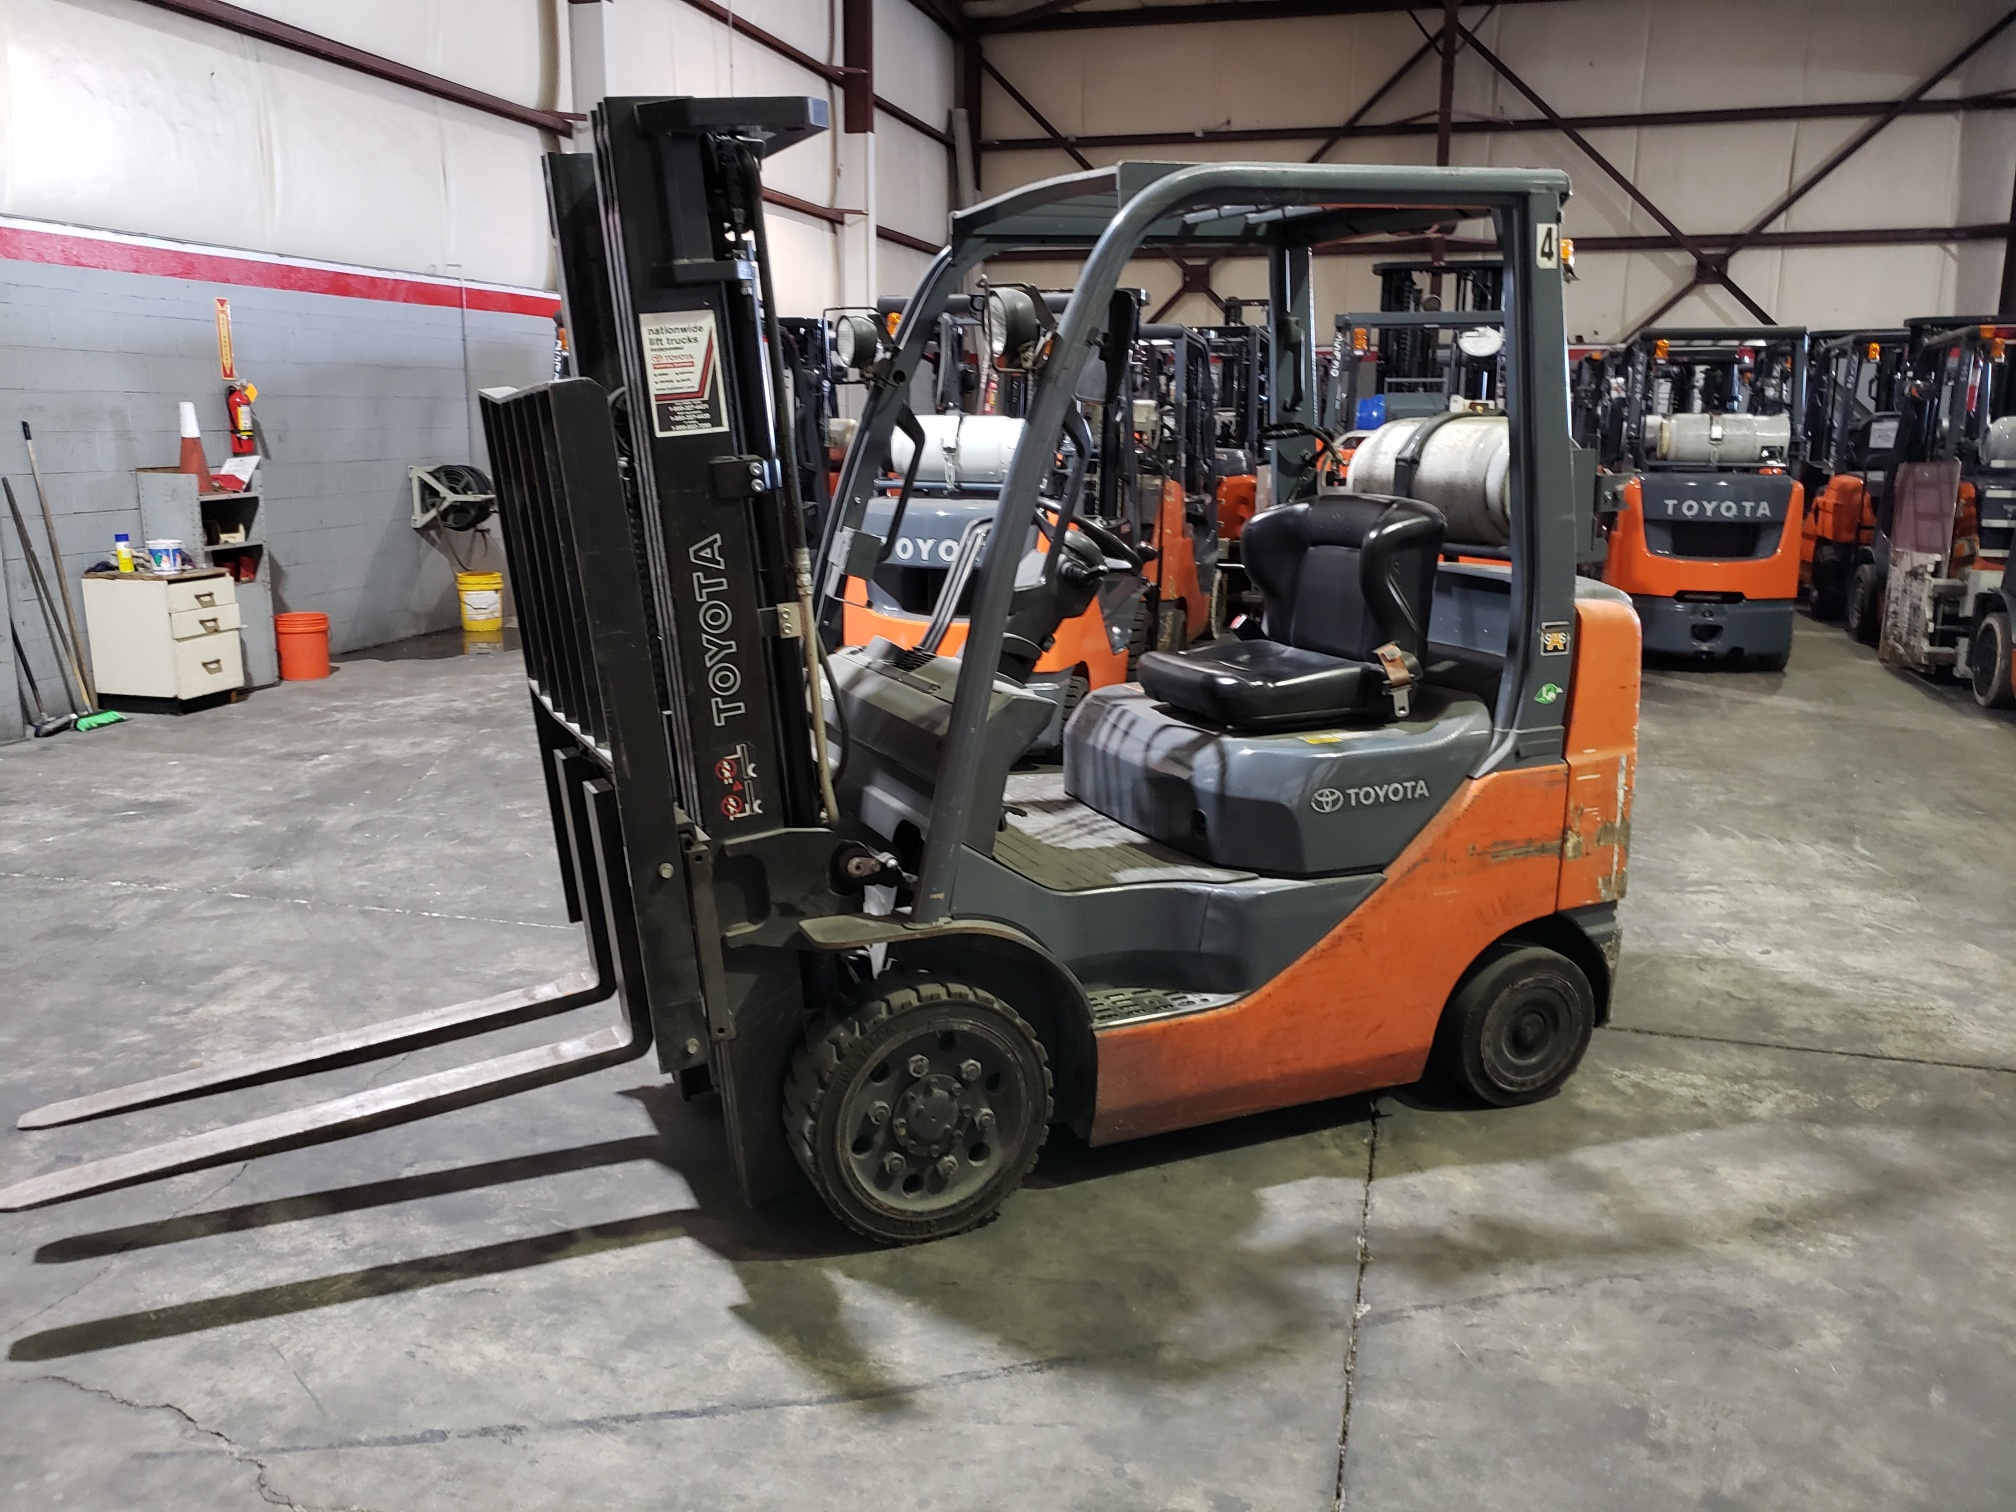 2011 Toyota Forklift 8fgcu25 Call For Price Nationwide Lift Trucks